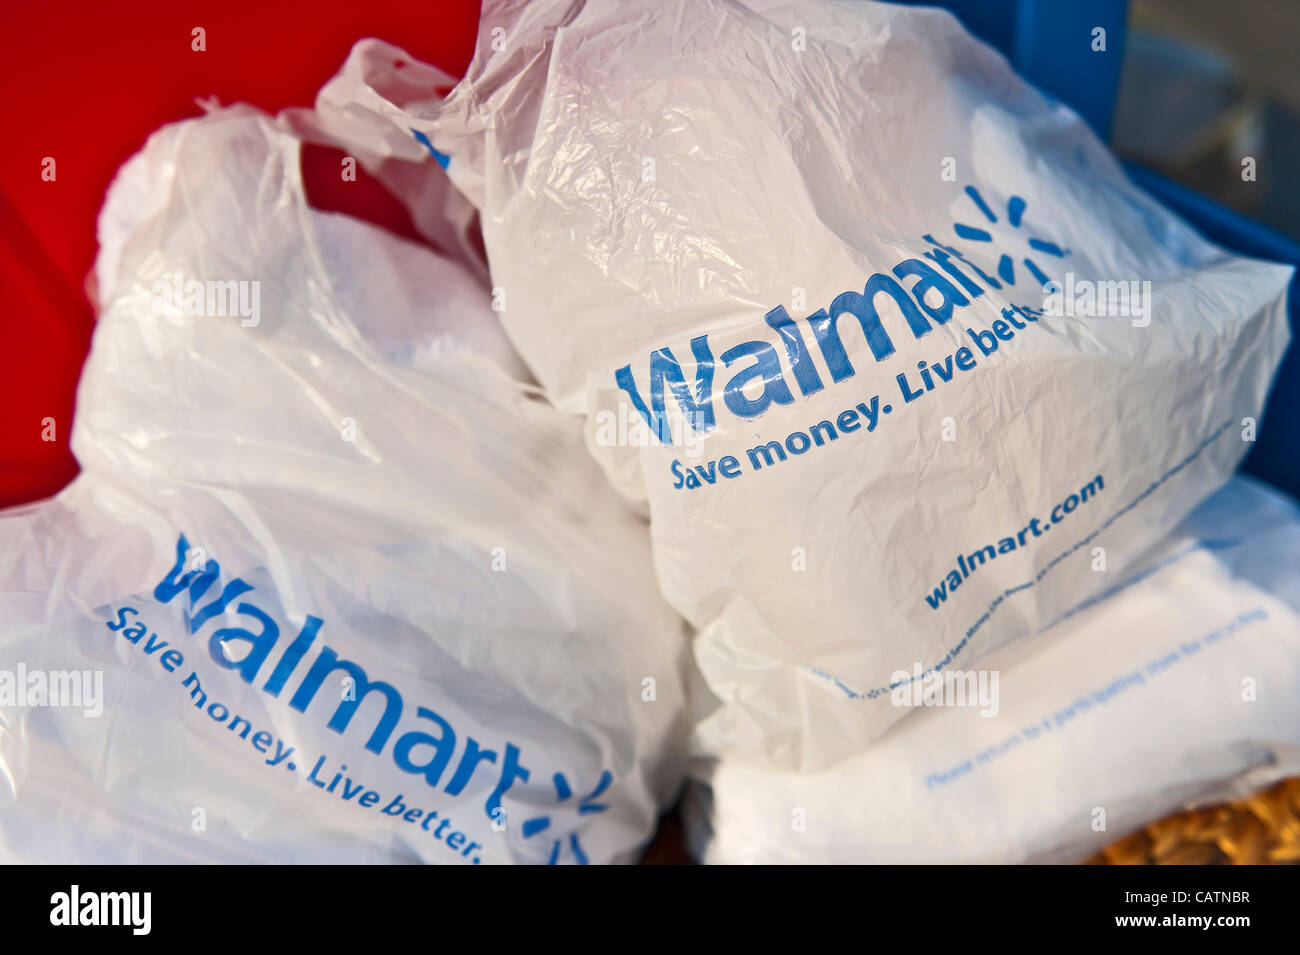 Walmart plastic shopping bags in shopping cart Stock Photo, Royalty Free Image: 41110939 - Alamy